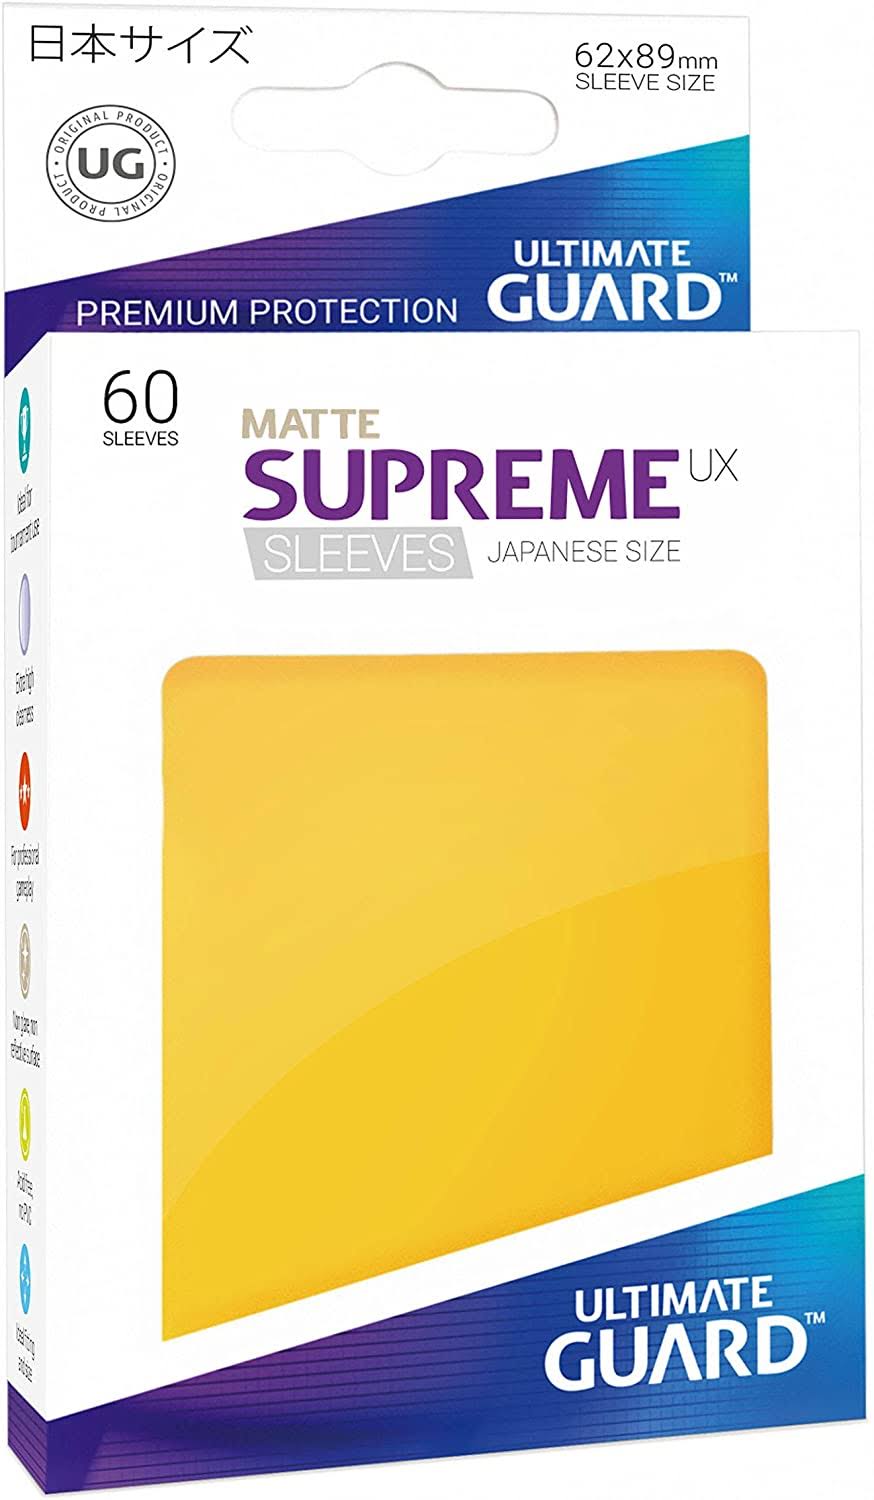 Ultimate Guard 60 Supreme UX Card Sleeves - Light Matte Yellow